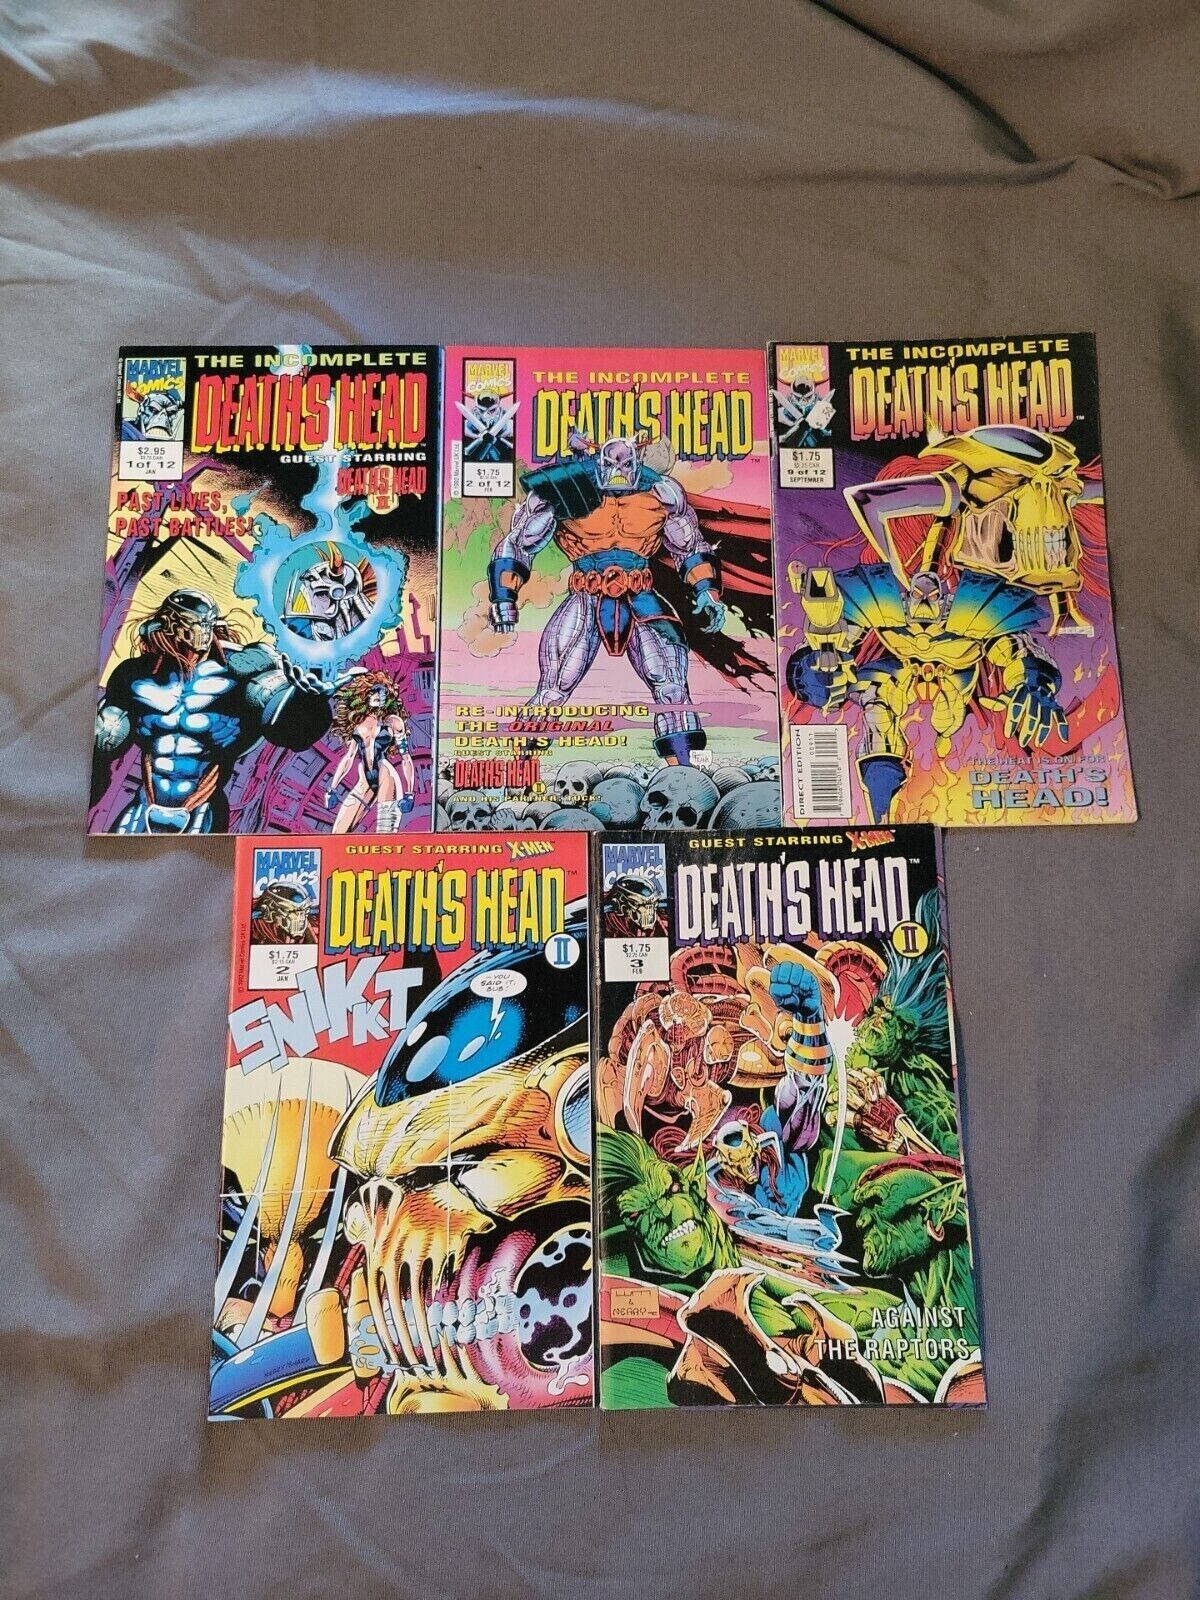 The Incomplete Death's Head #1, 2, 9 Death's Head #2, 3 (Marvel UK) Wolverine